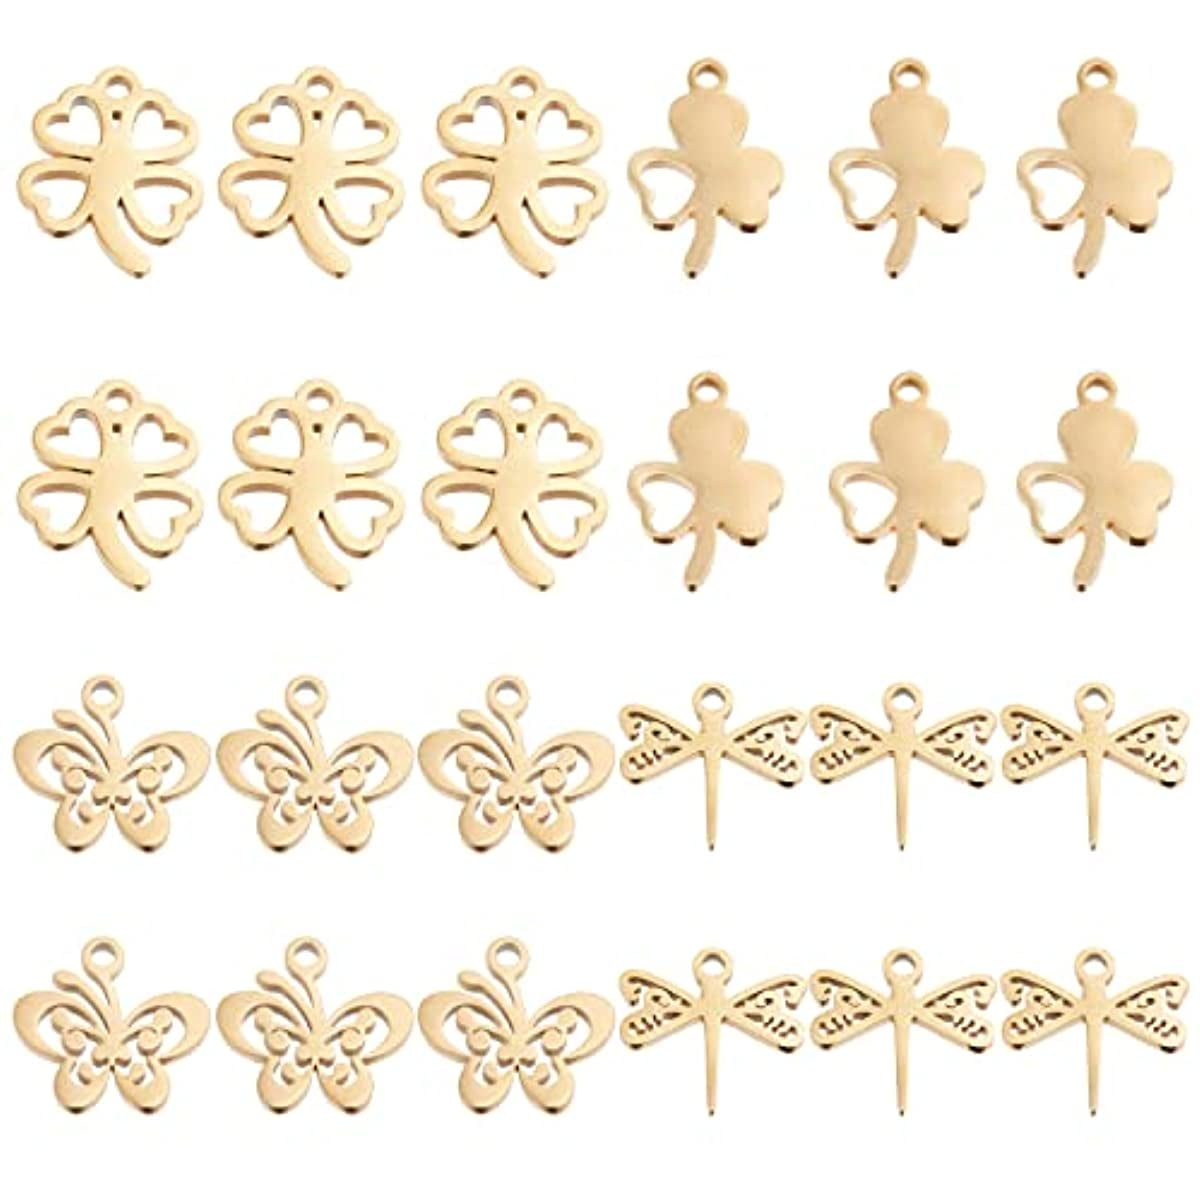 24pcs antique silver color flower charms Collection for diy